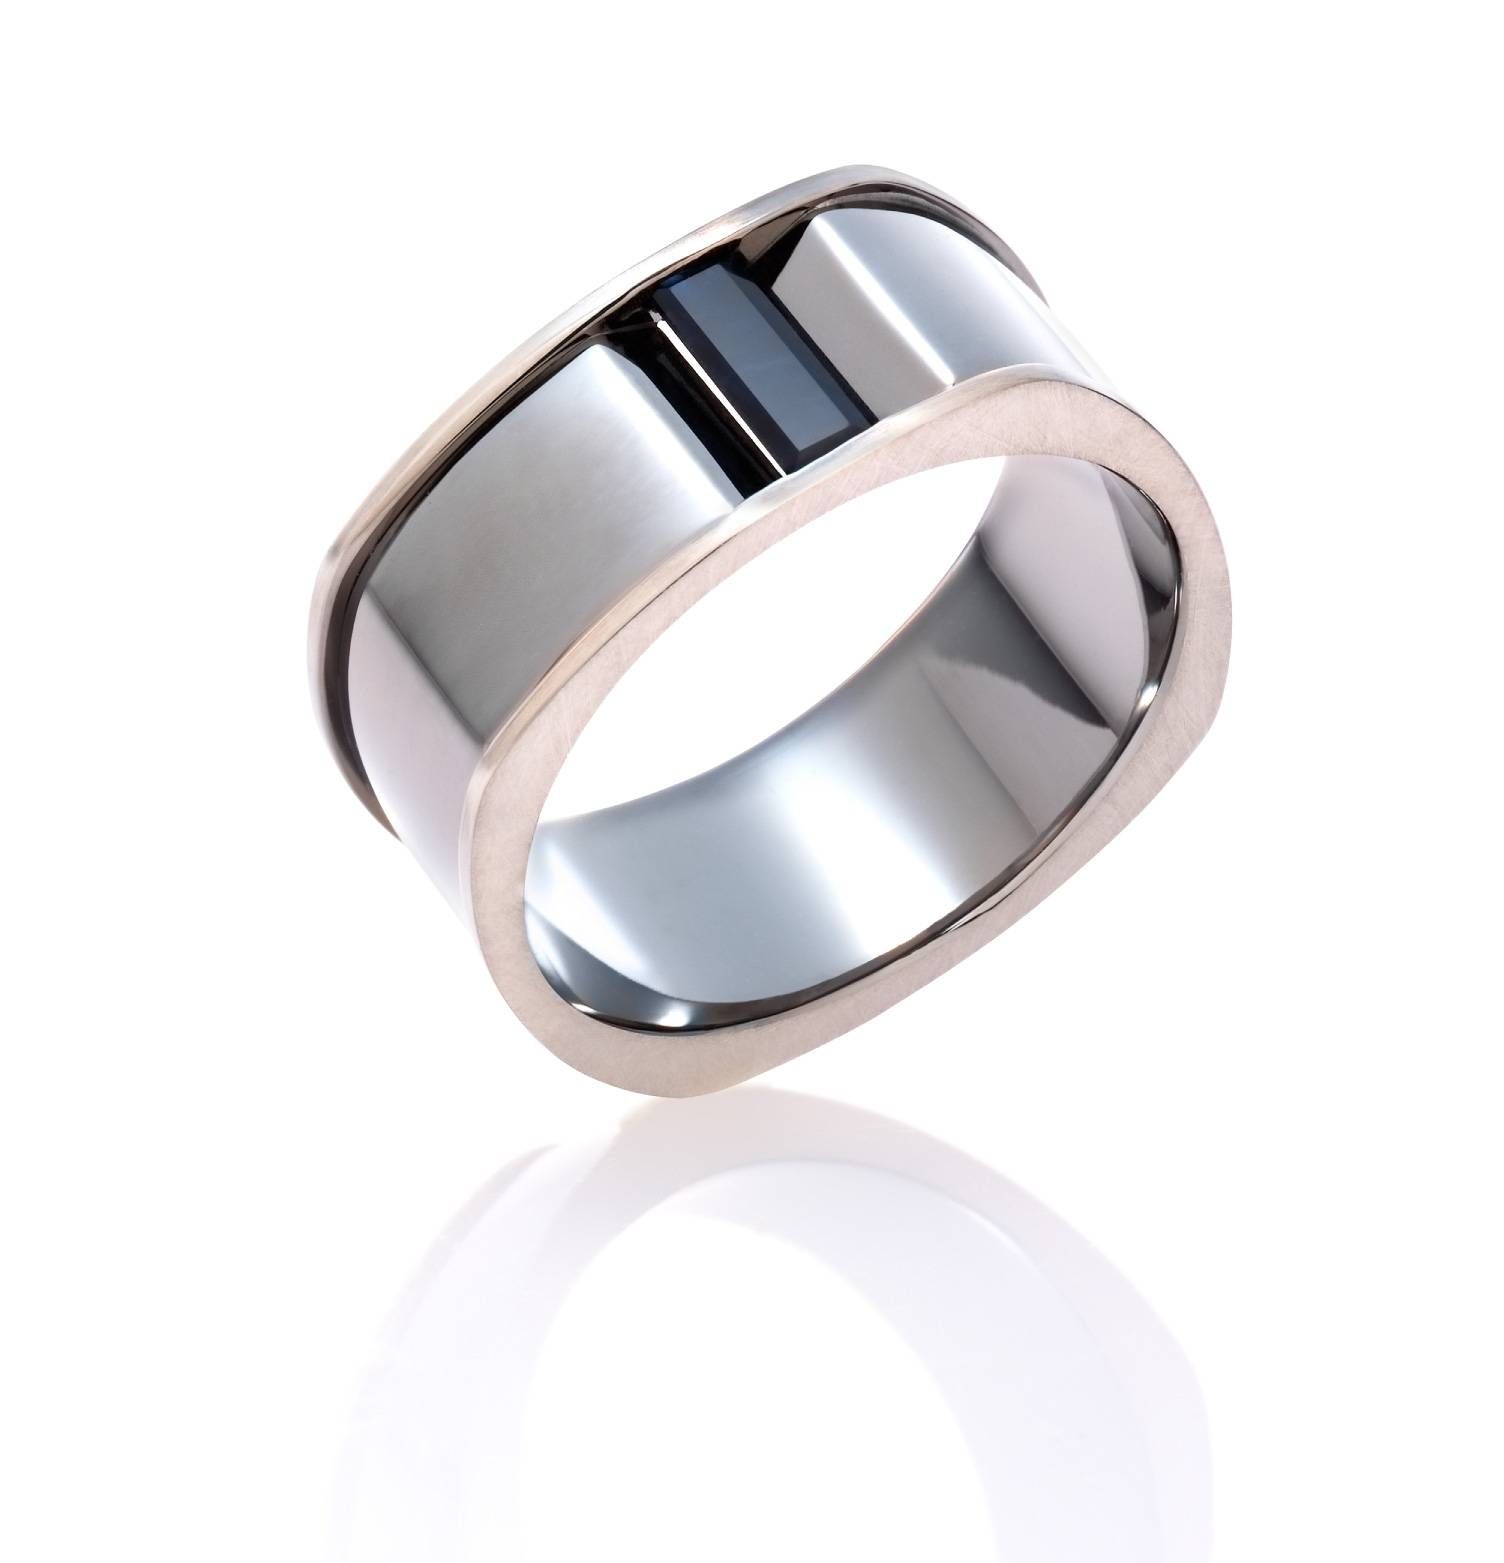 Mens Wedding Bands| Mjs Jewellery – James St Fortitude Valley With Recent European Wedding Bands (View 2 of 15)